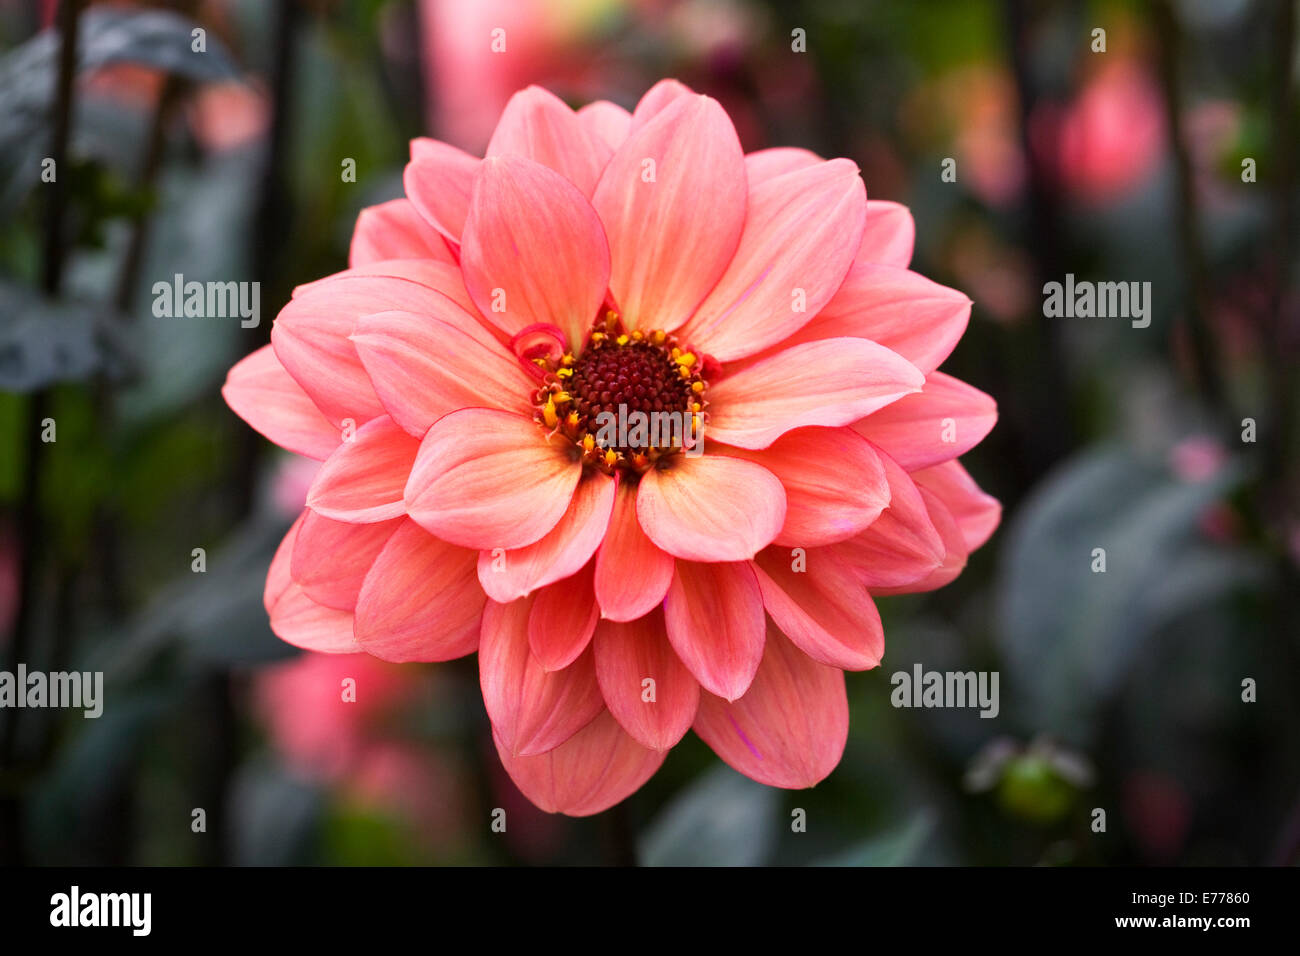 Dahlia 'Classic Poeme' growing in an herbaceous border. Stock Photo